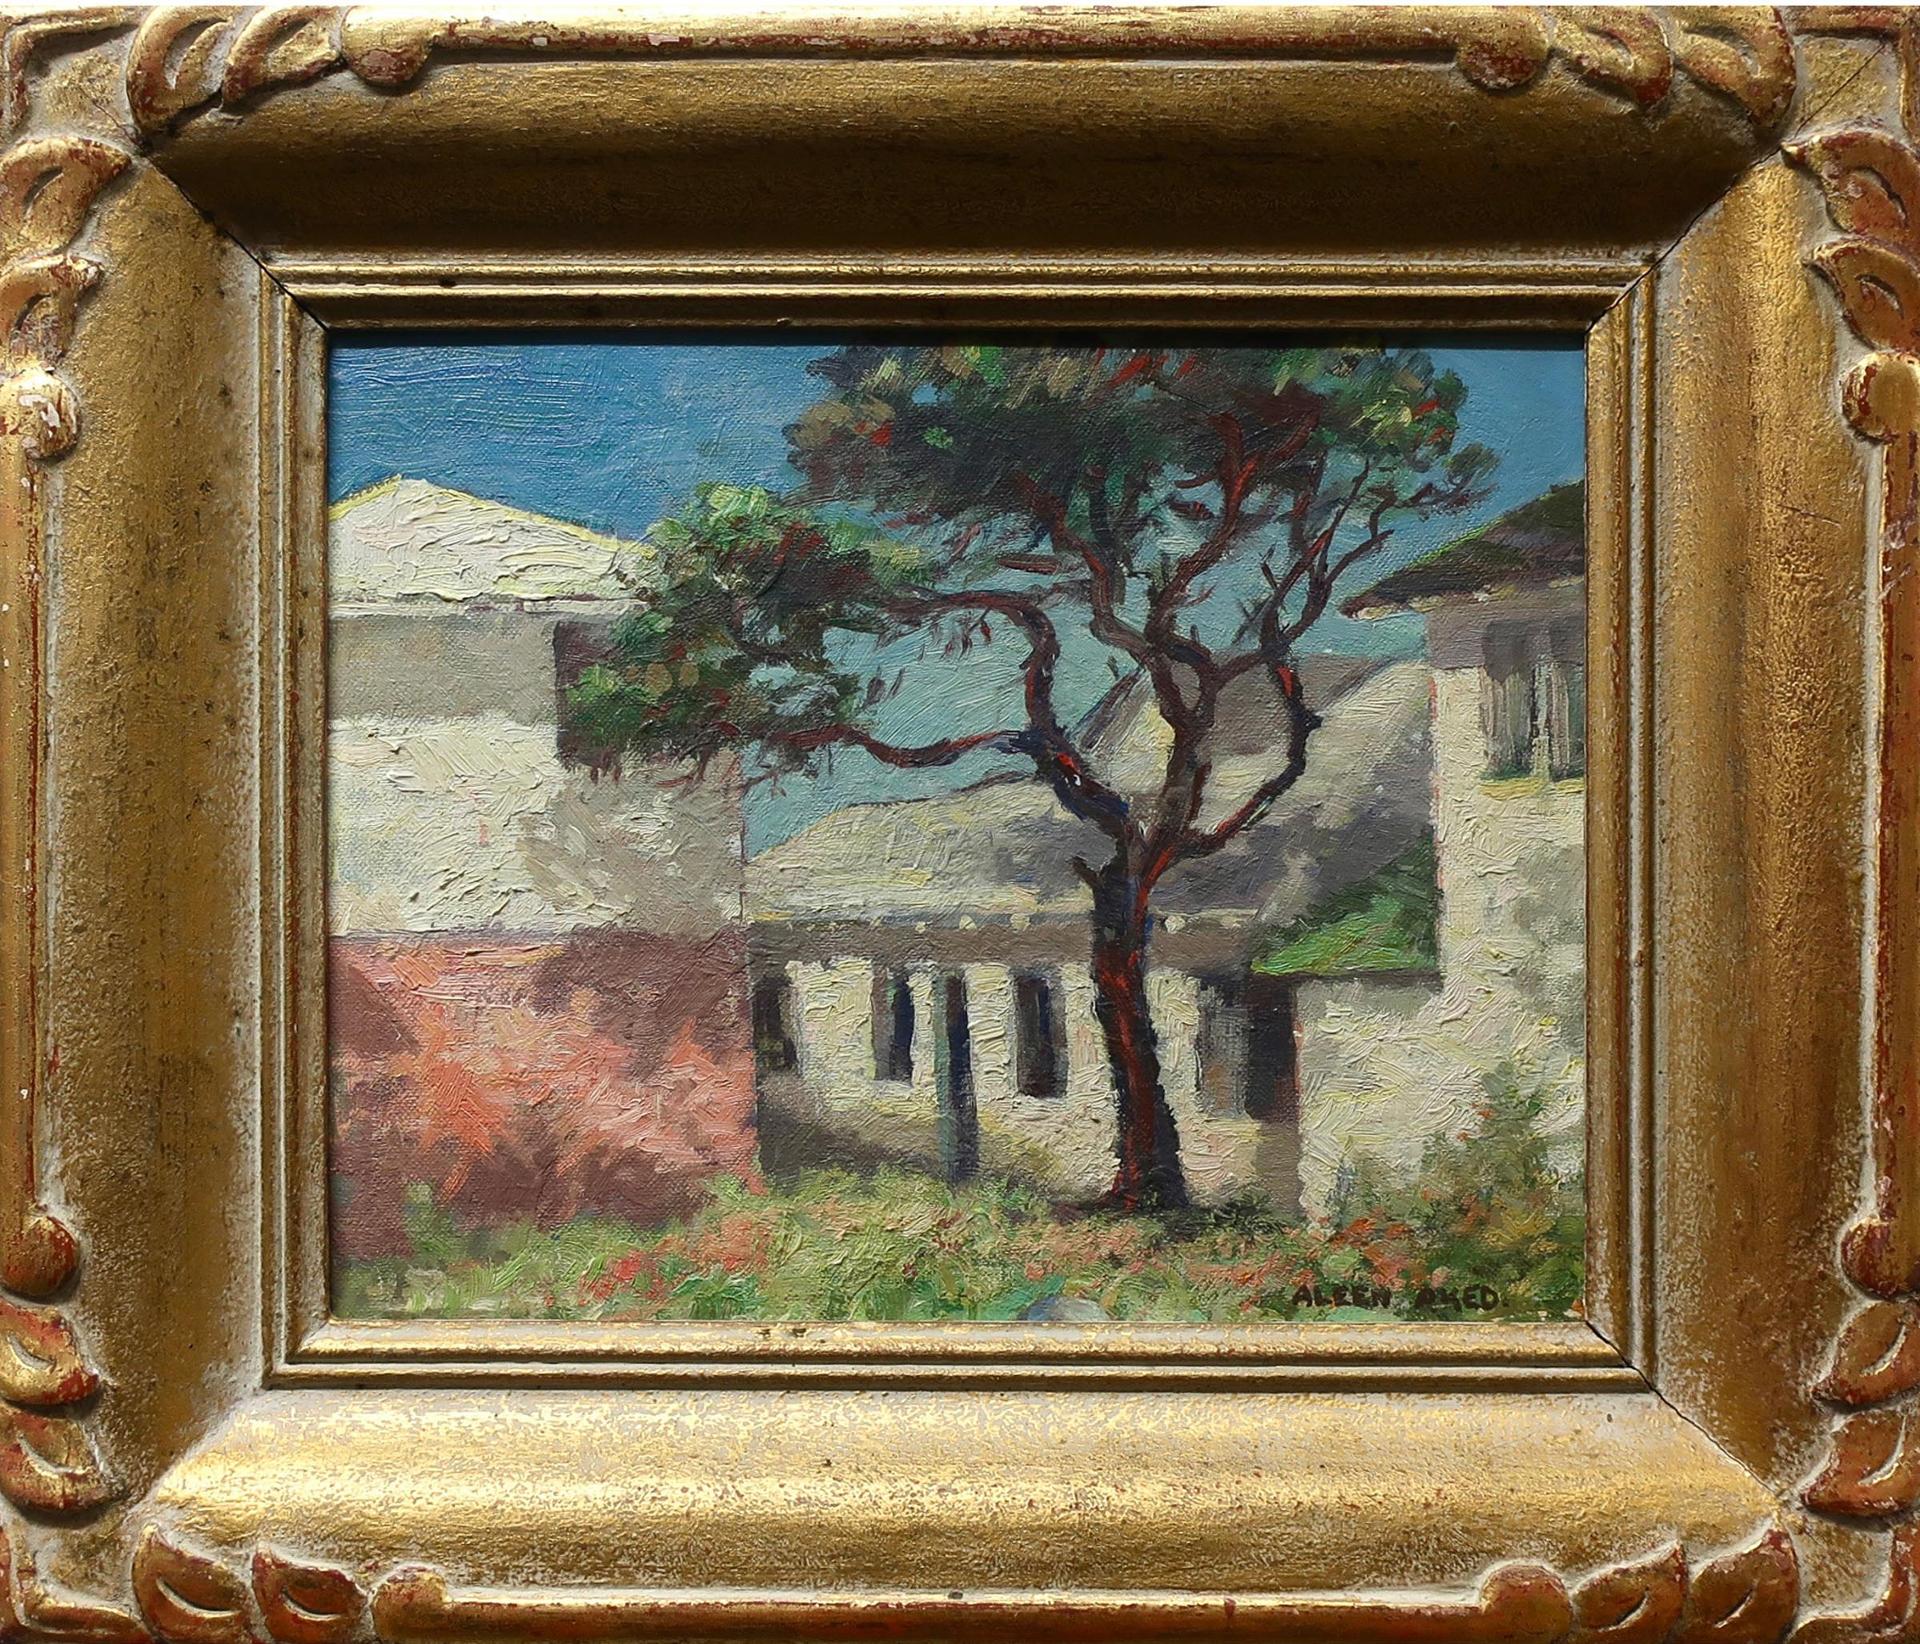 Aleen Akeed - Untitled (Village Study With Tree)